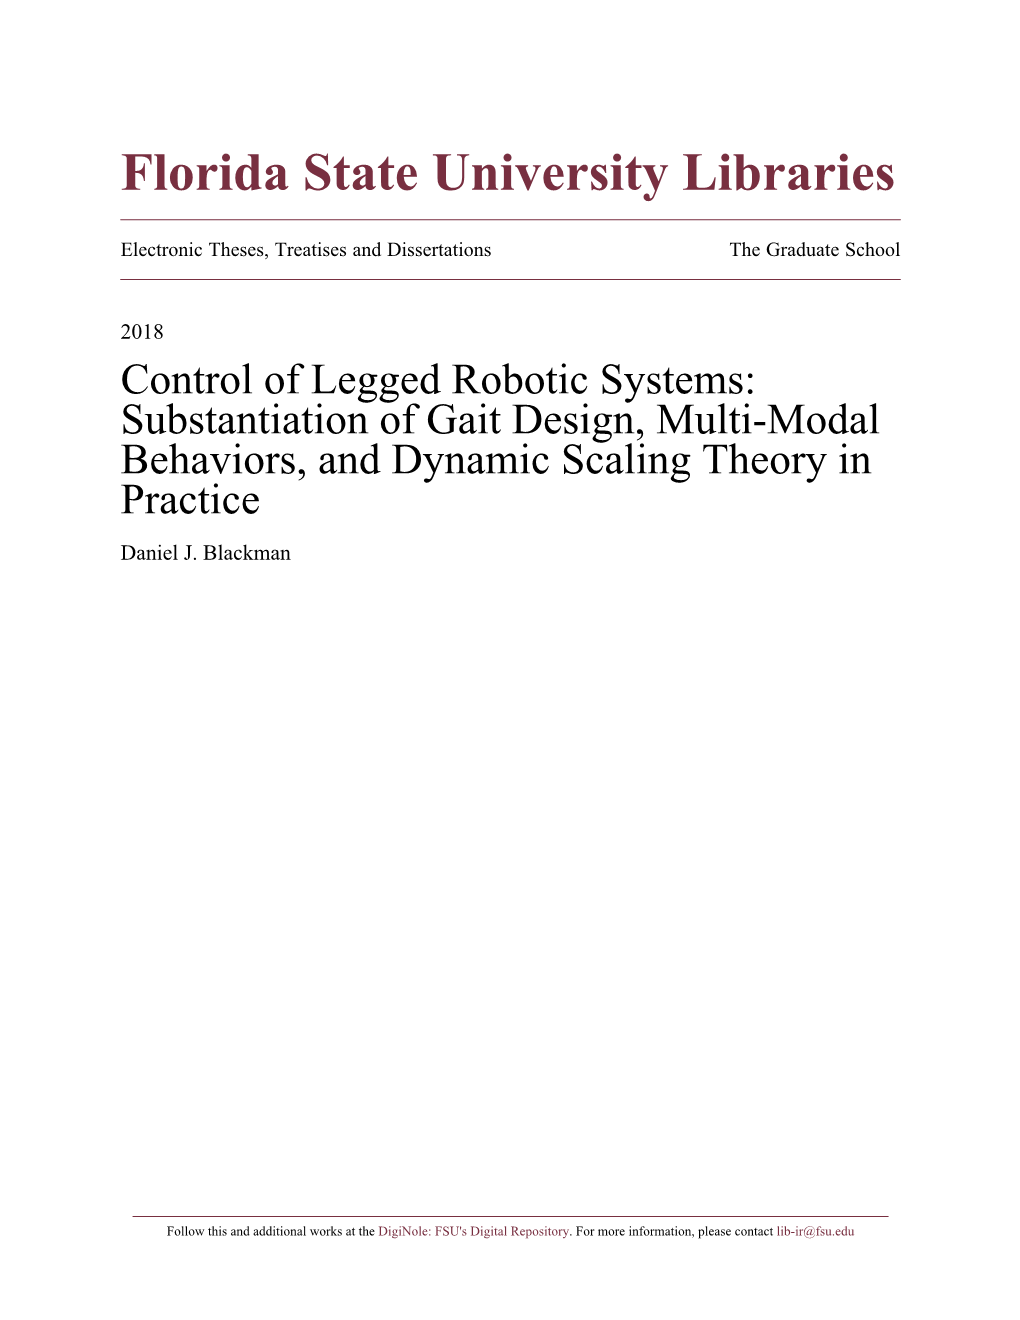 Control of Legged Robotic Systems: Substantiation of Gait Design, Multi-Modal Behaviors, and Dynamic Scaling Theory in Practice Daniel J